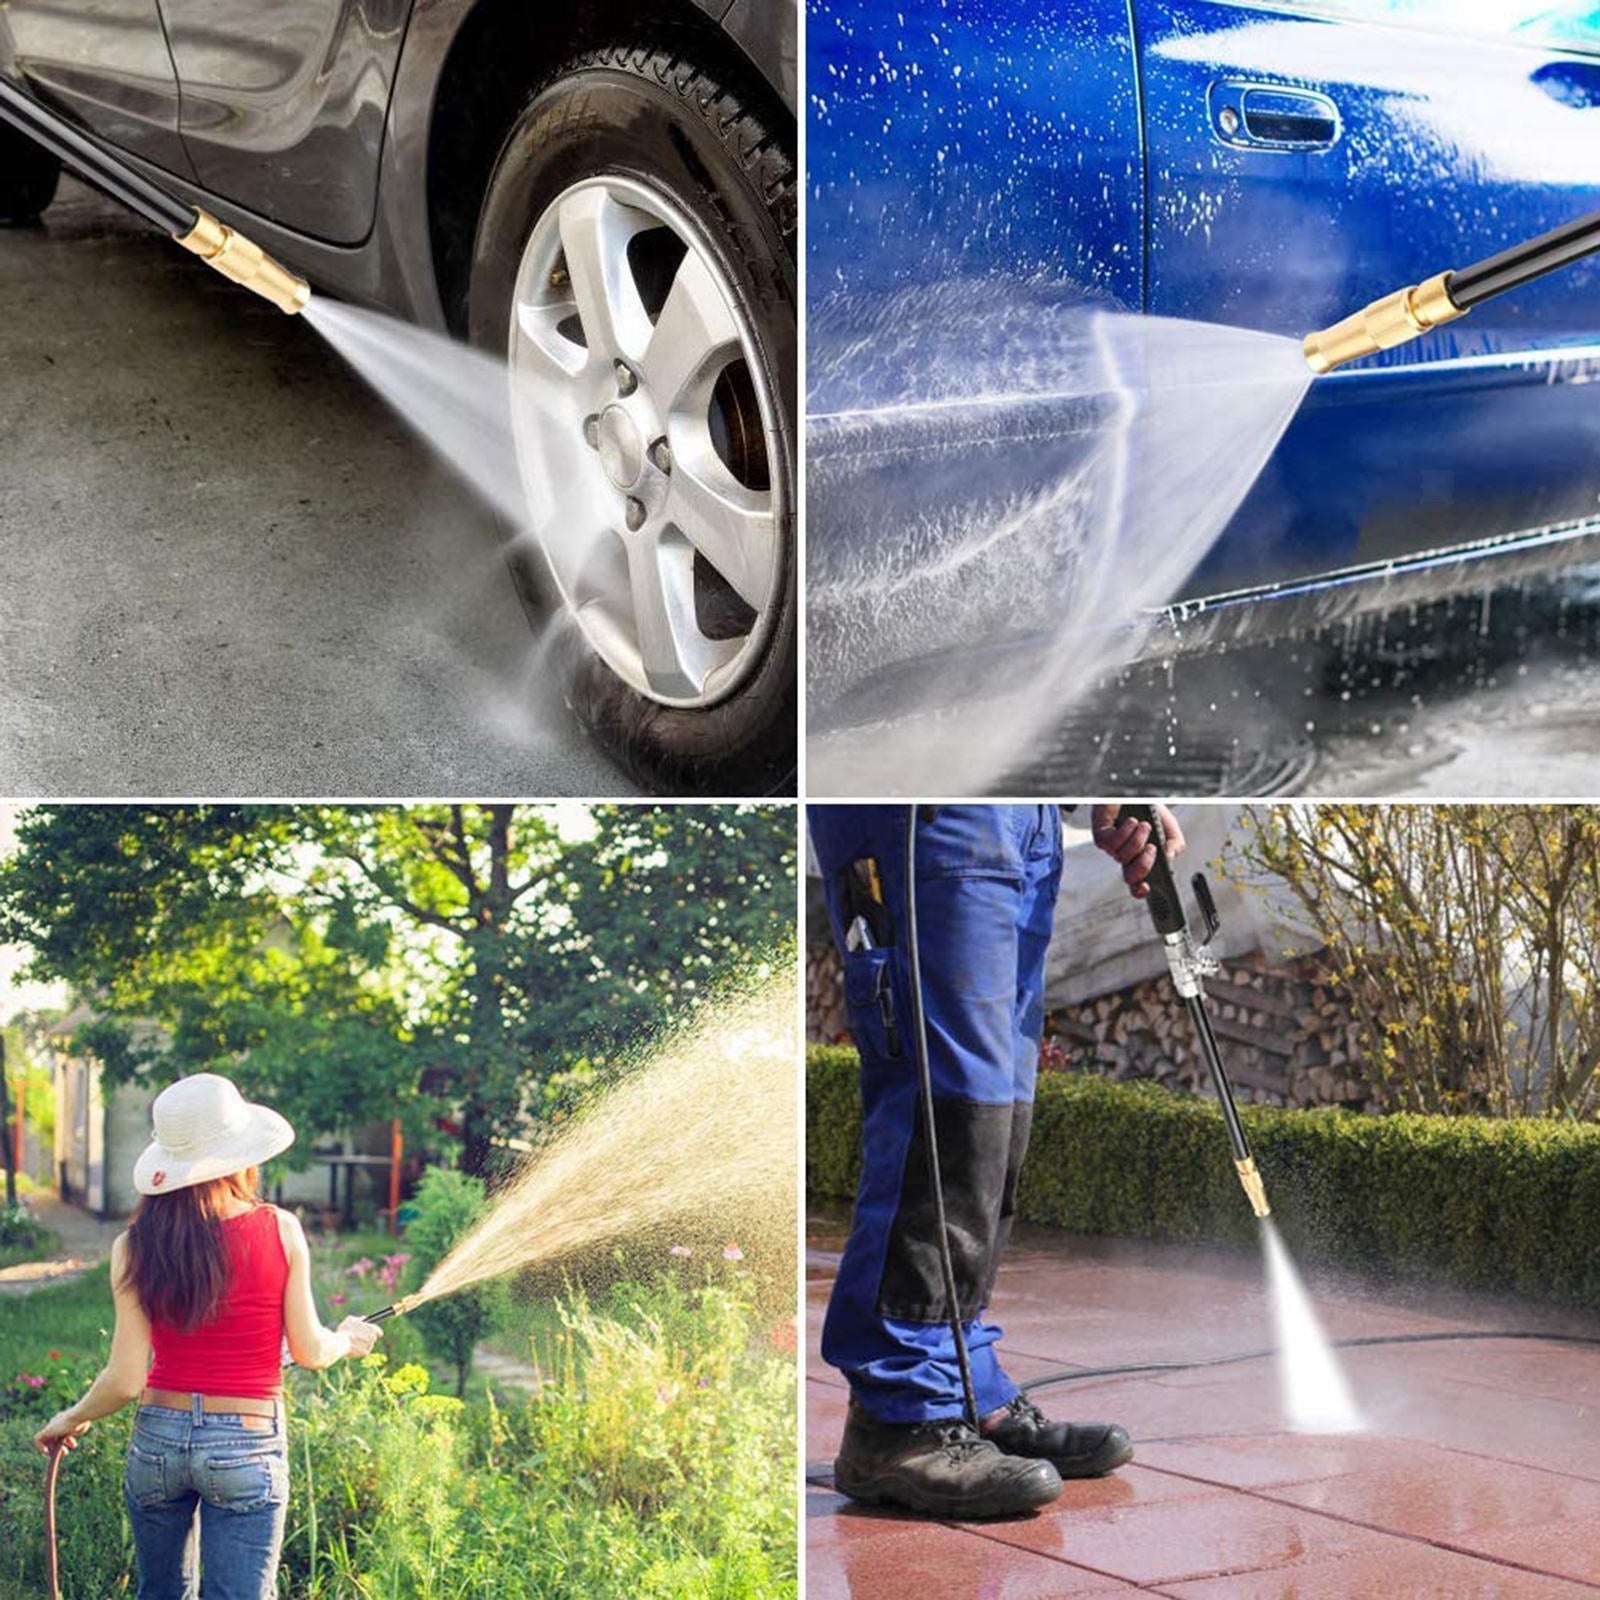 Power Washer Wand for Car Washing Car Window Cleaning Tool 3 Hose Nozzle